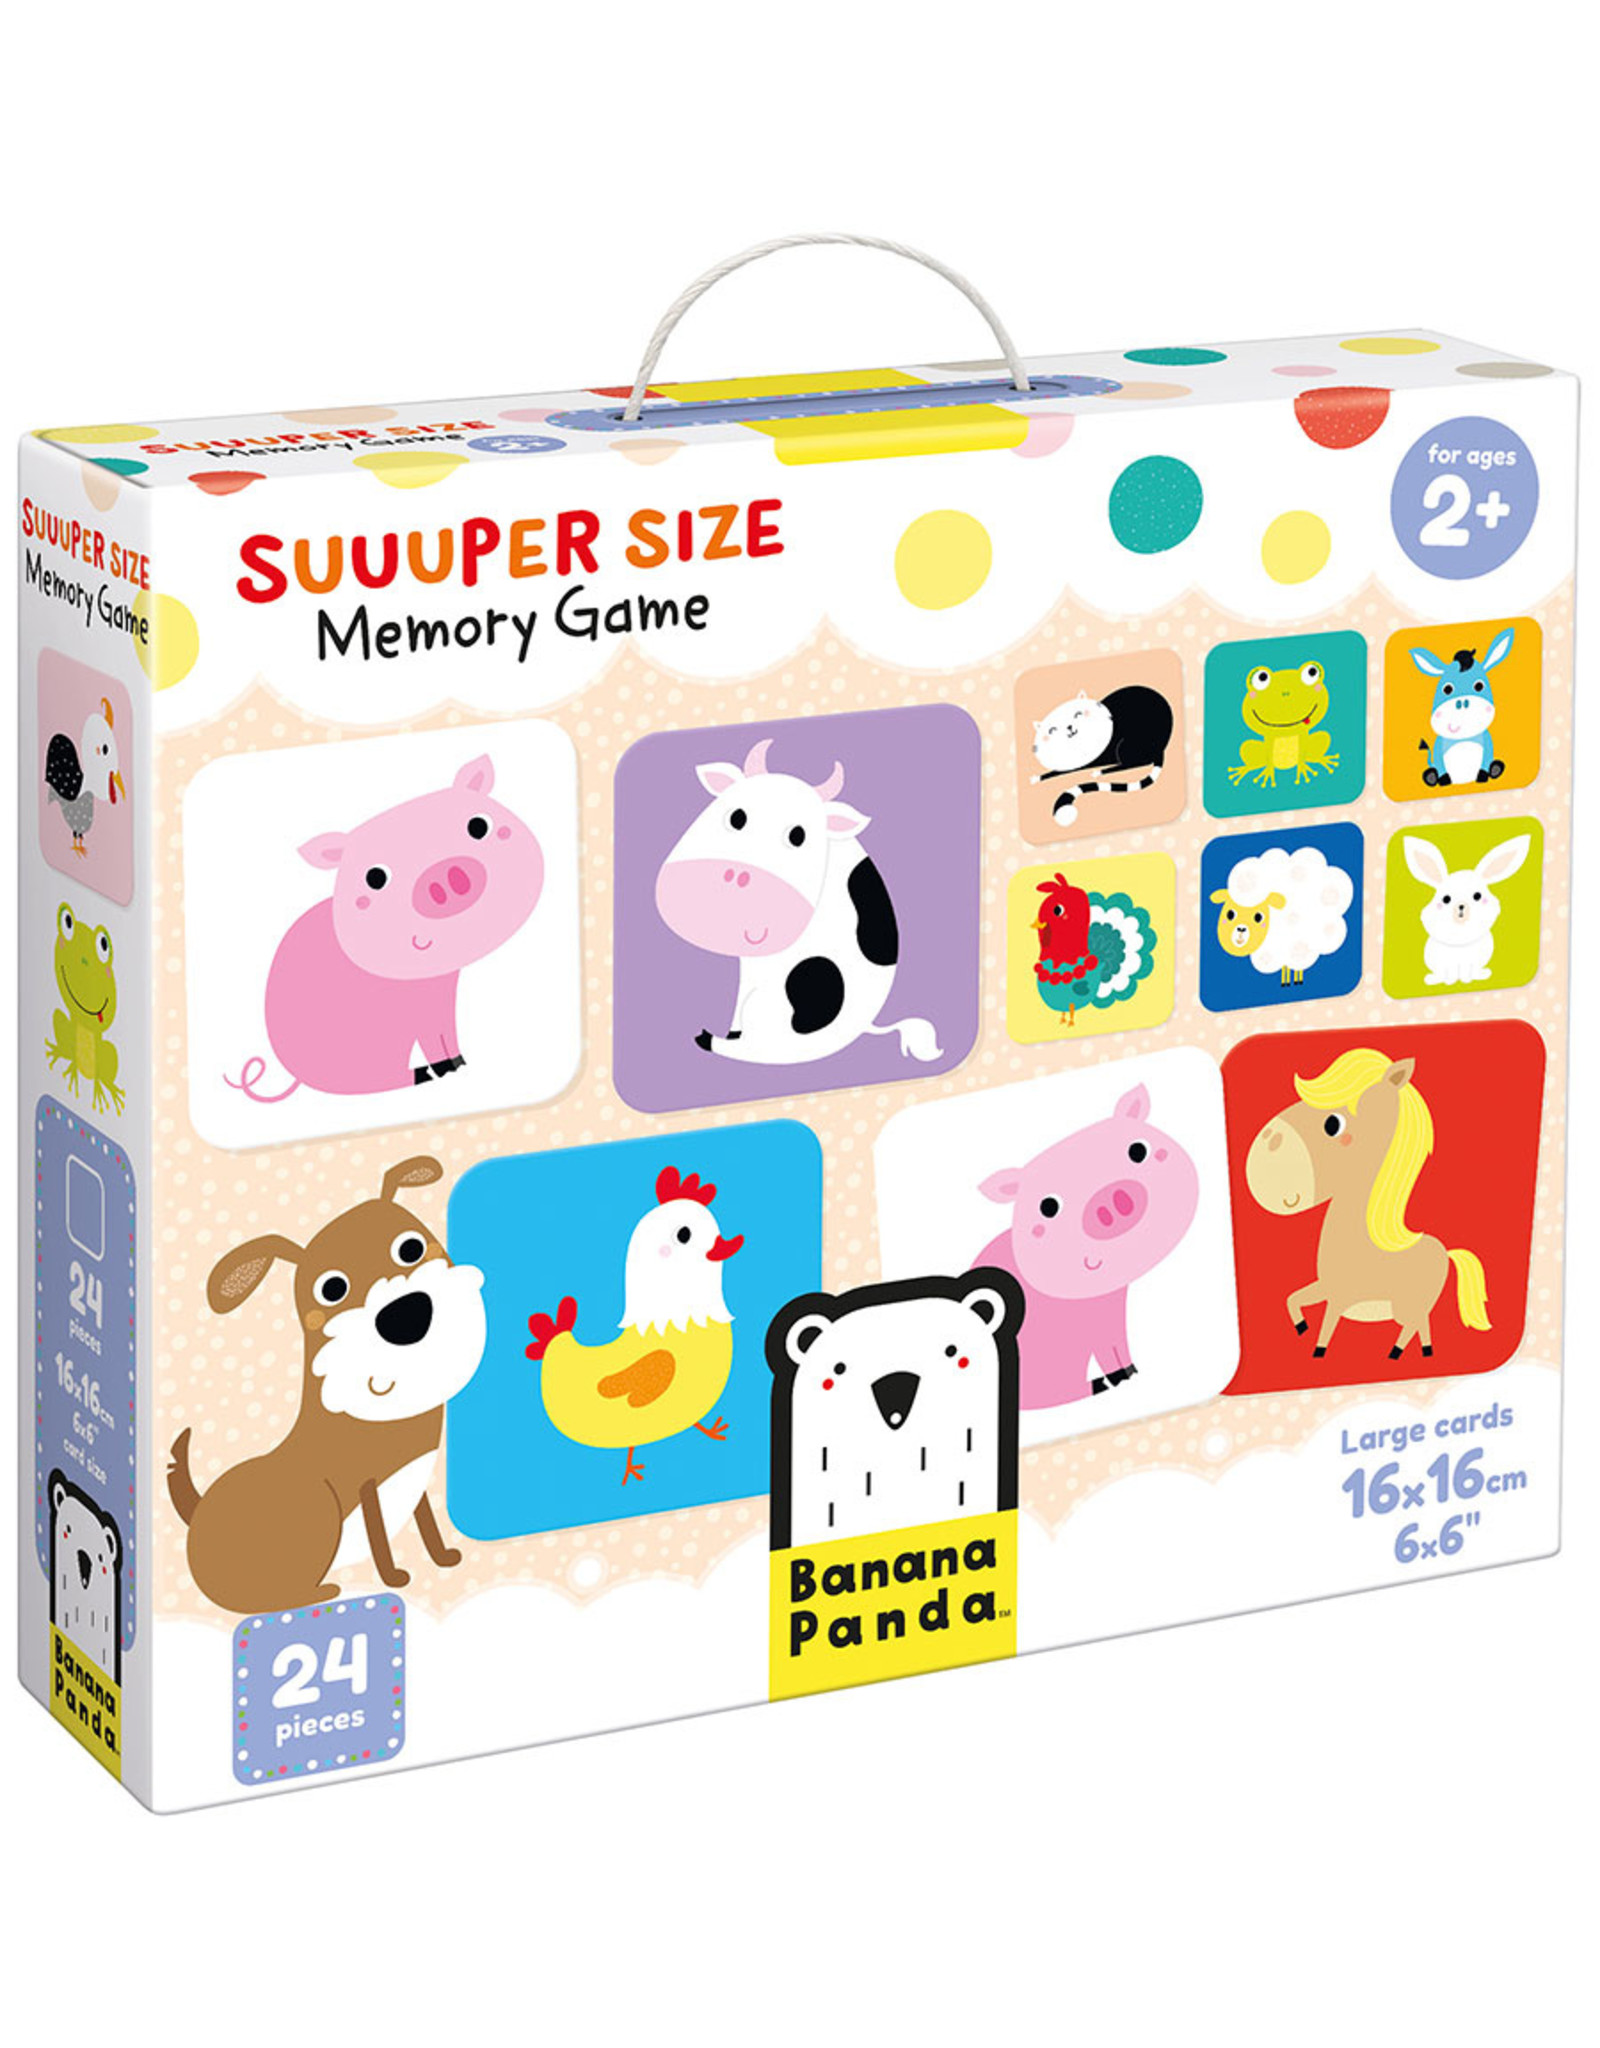 Suuuper Size Memory Game